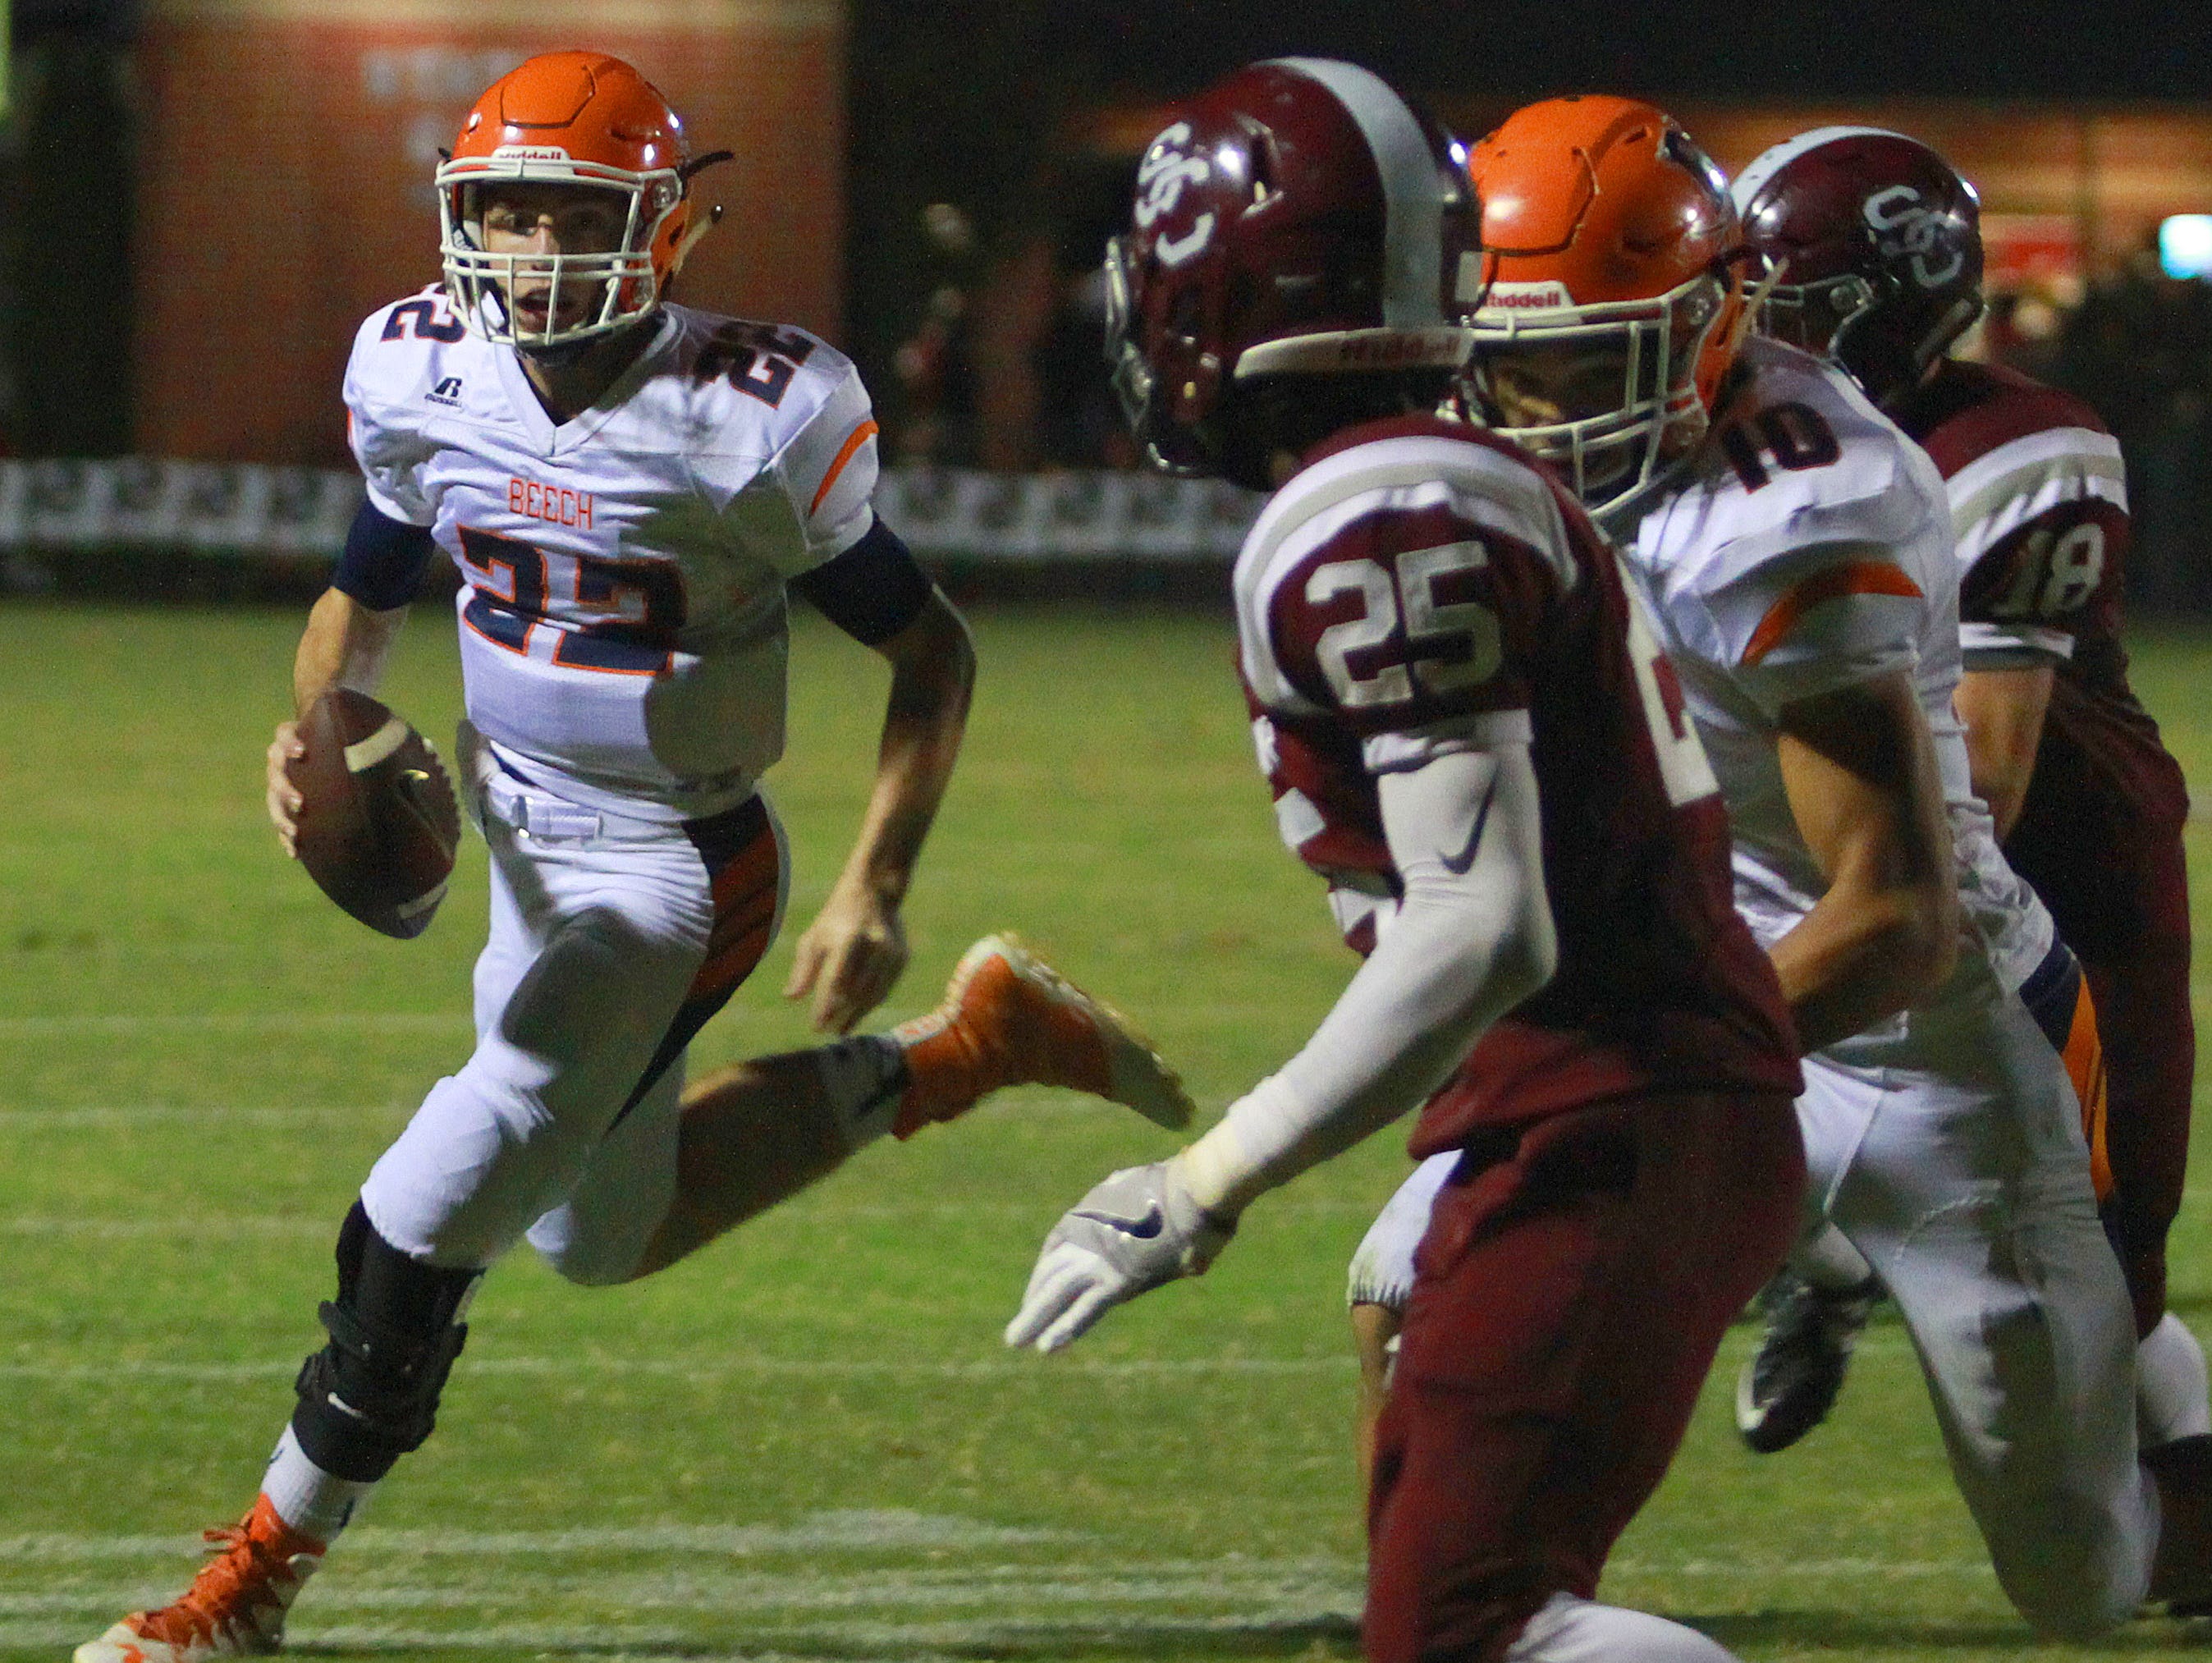 Beech quarterback Nelson Smith looks to scramble as Station Camp's Shawn McKinley closes in during Friday's contest.